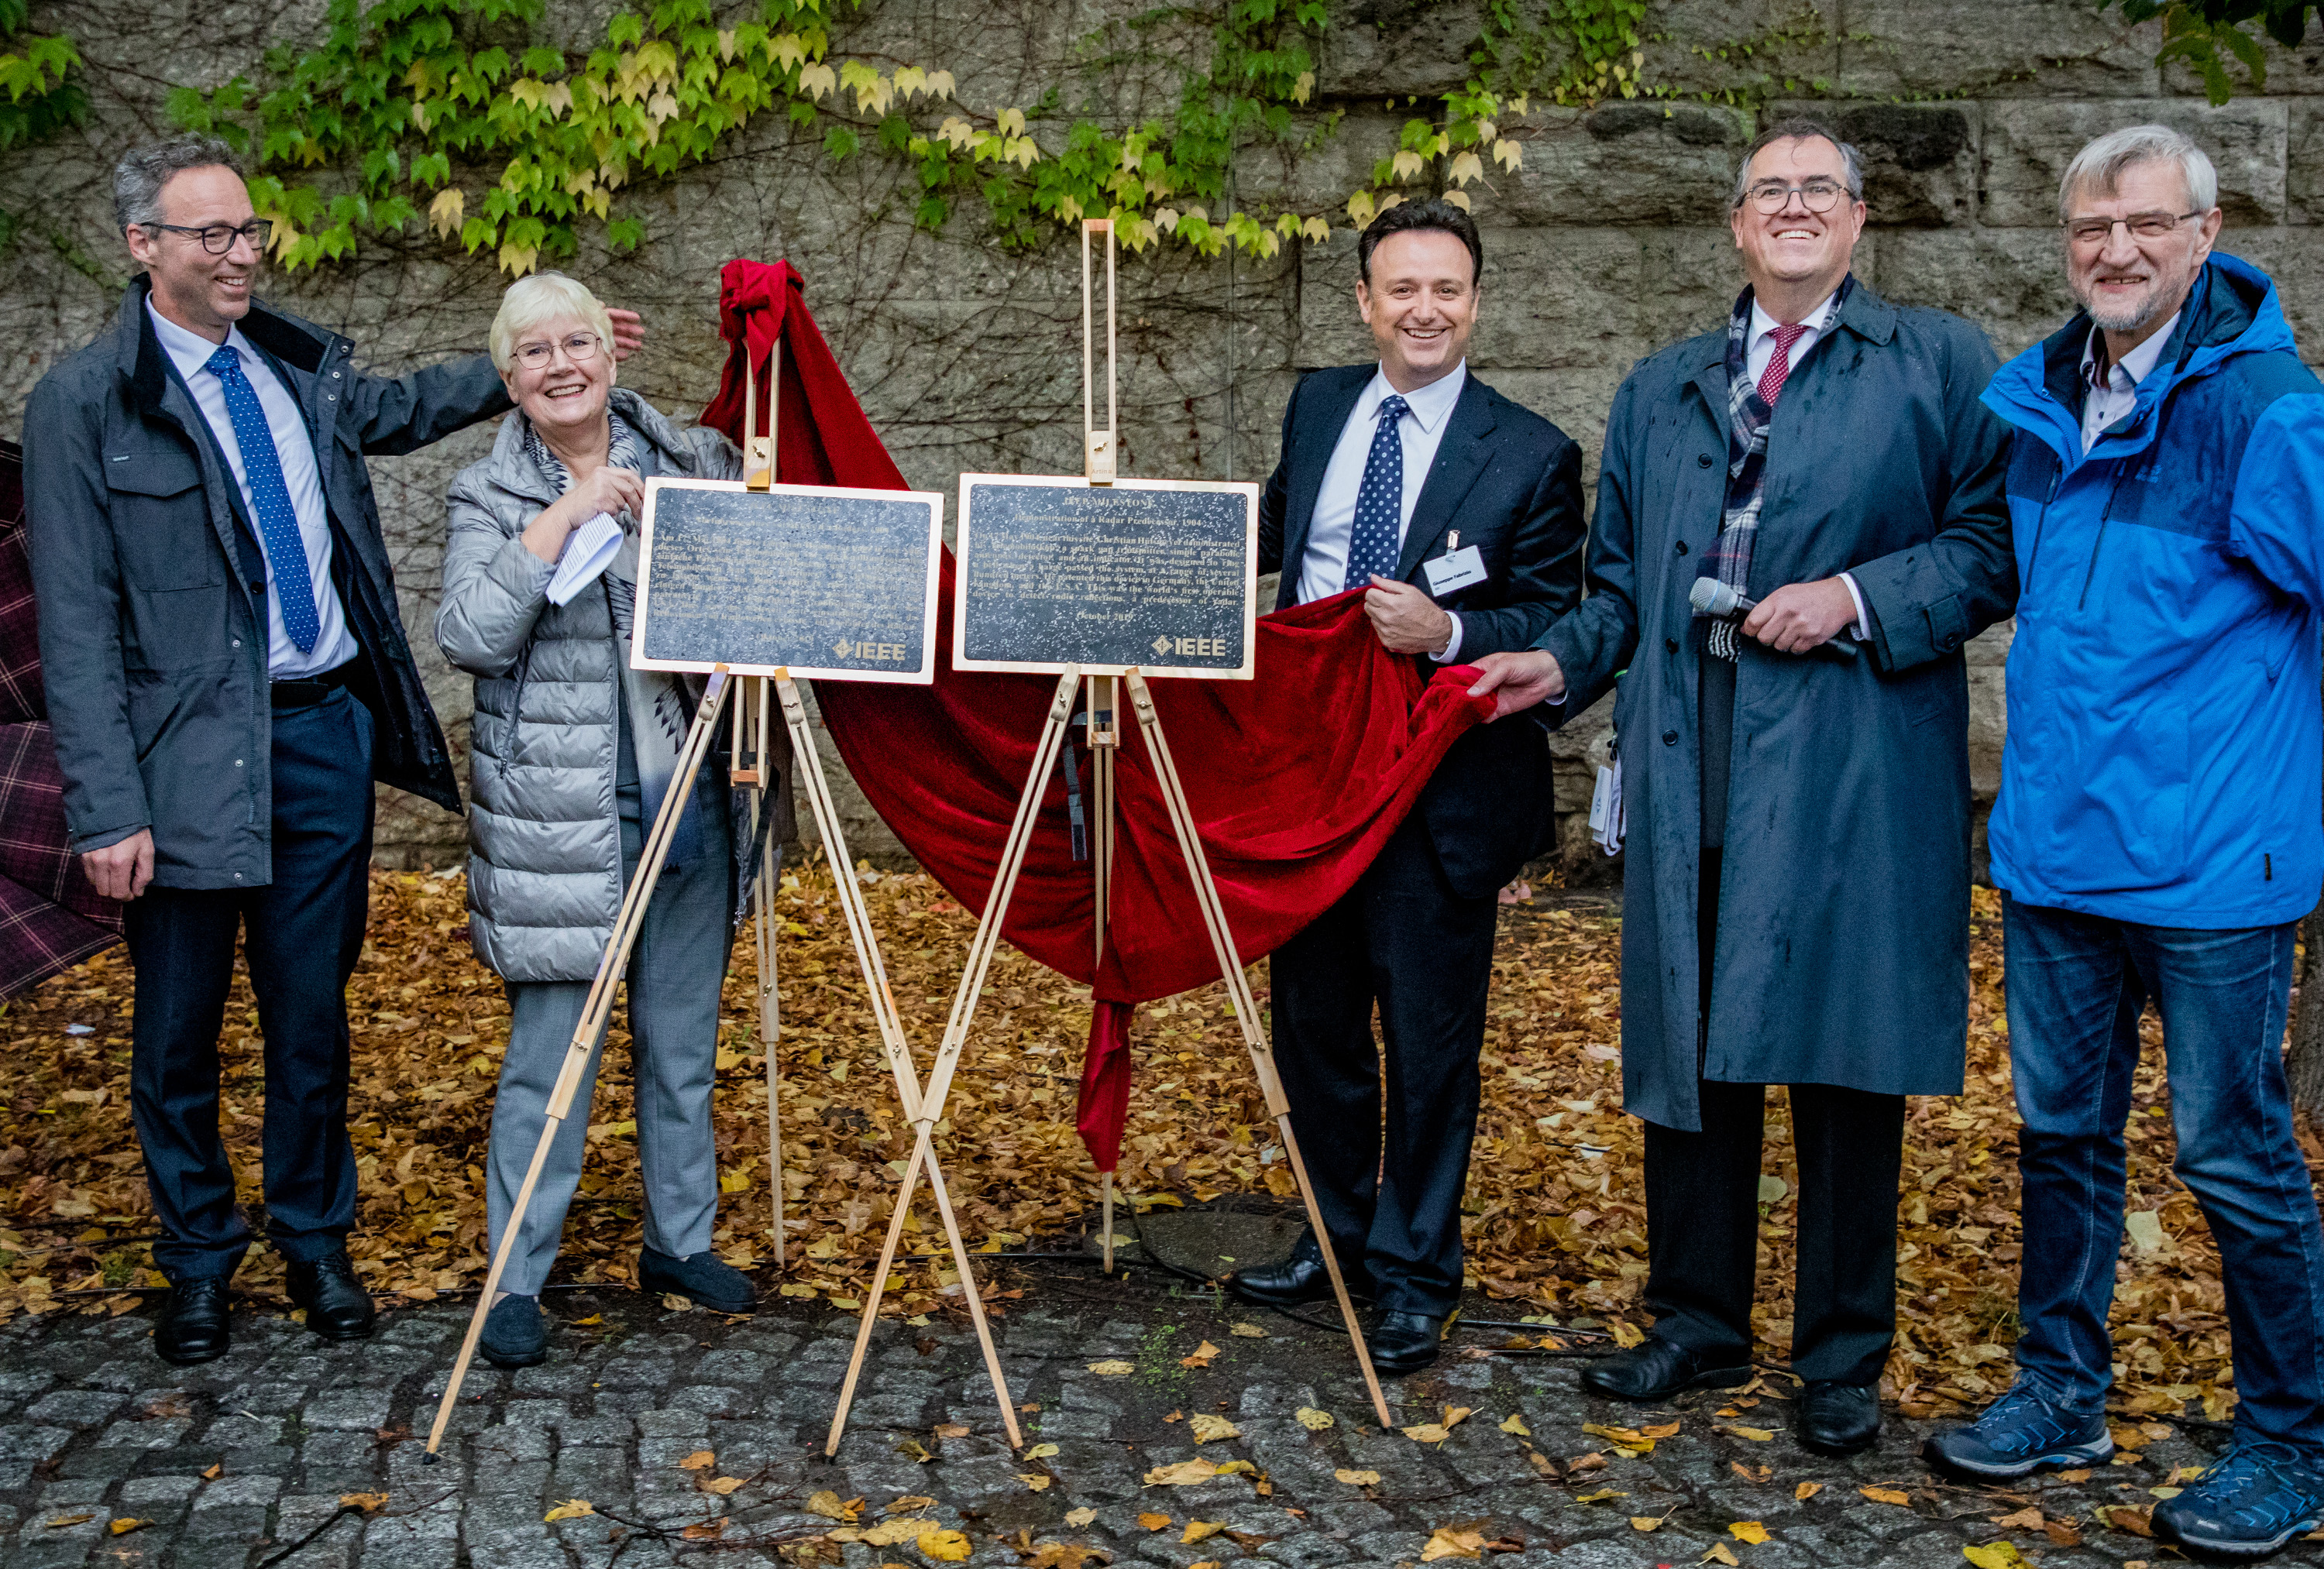 The unveiling of the Hülsmeyer IEEE Milestones Plaque at the Hohenzollern Bridge in Cologne with Prof. Knott (Fraunhofer FHR), Antje Turanli (granddaughter of Hülsmeyer), Joe Fabrizio (IEEE AESS President), Wolfgang Koch (Head of Department Fraunhofer FKIE), Andreas Hupke (District Mayor Cologne-City).